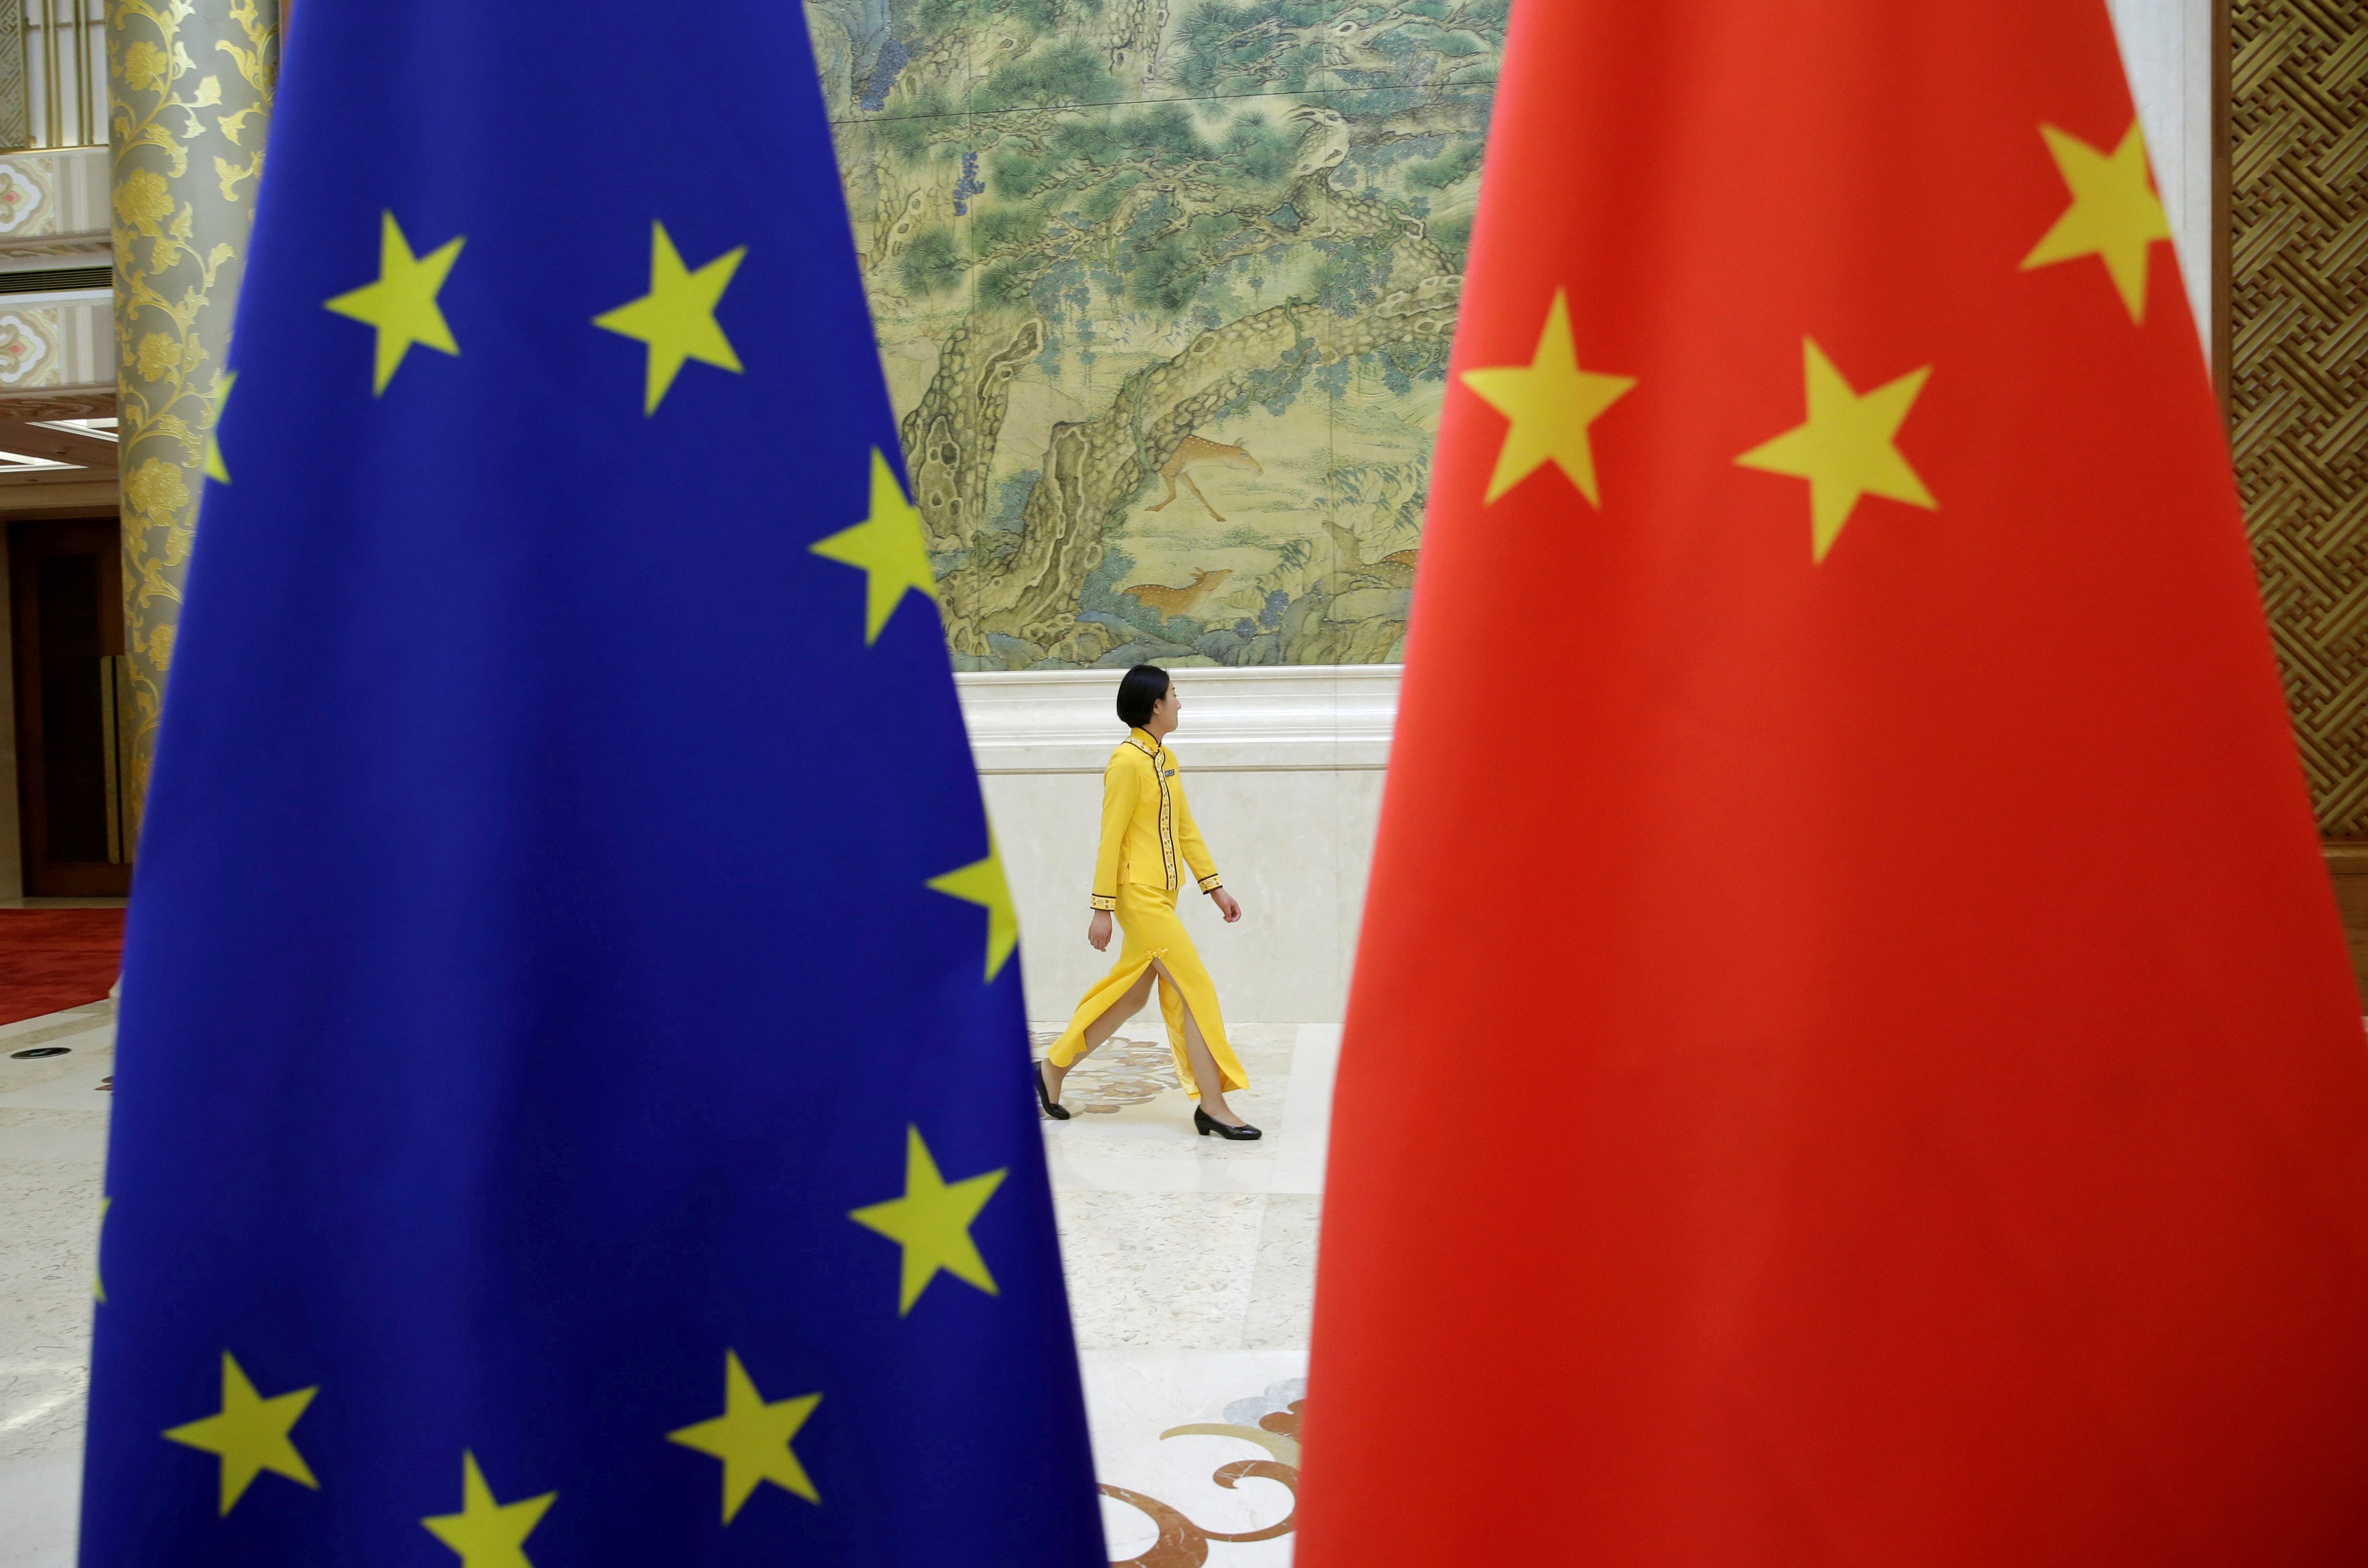 The Diaoyutai State Guesthouse in Beijing was the venue for high-level talks on the economy between China and the EU in June. The EU may not like Donald Trump’s protectionist stance, but, like the US, it has similar complaints of China’s trade and investment practices. Photo: Reuters